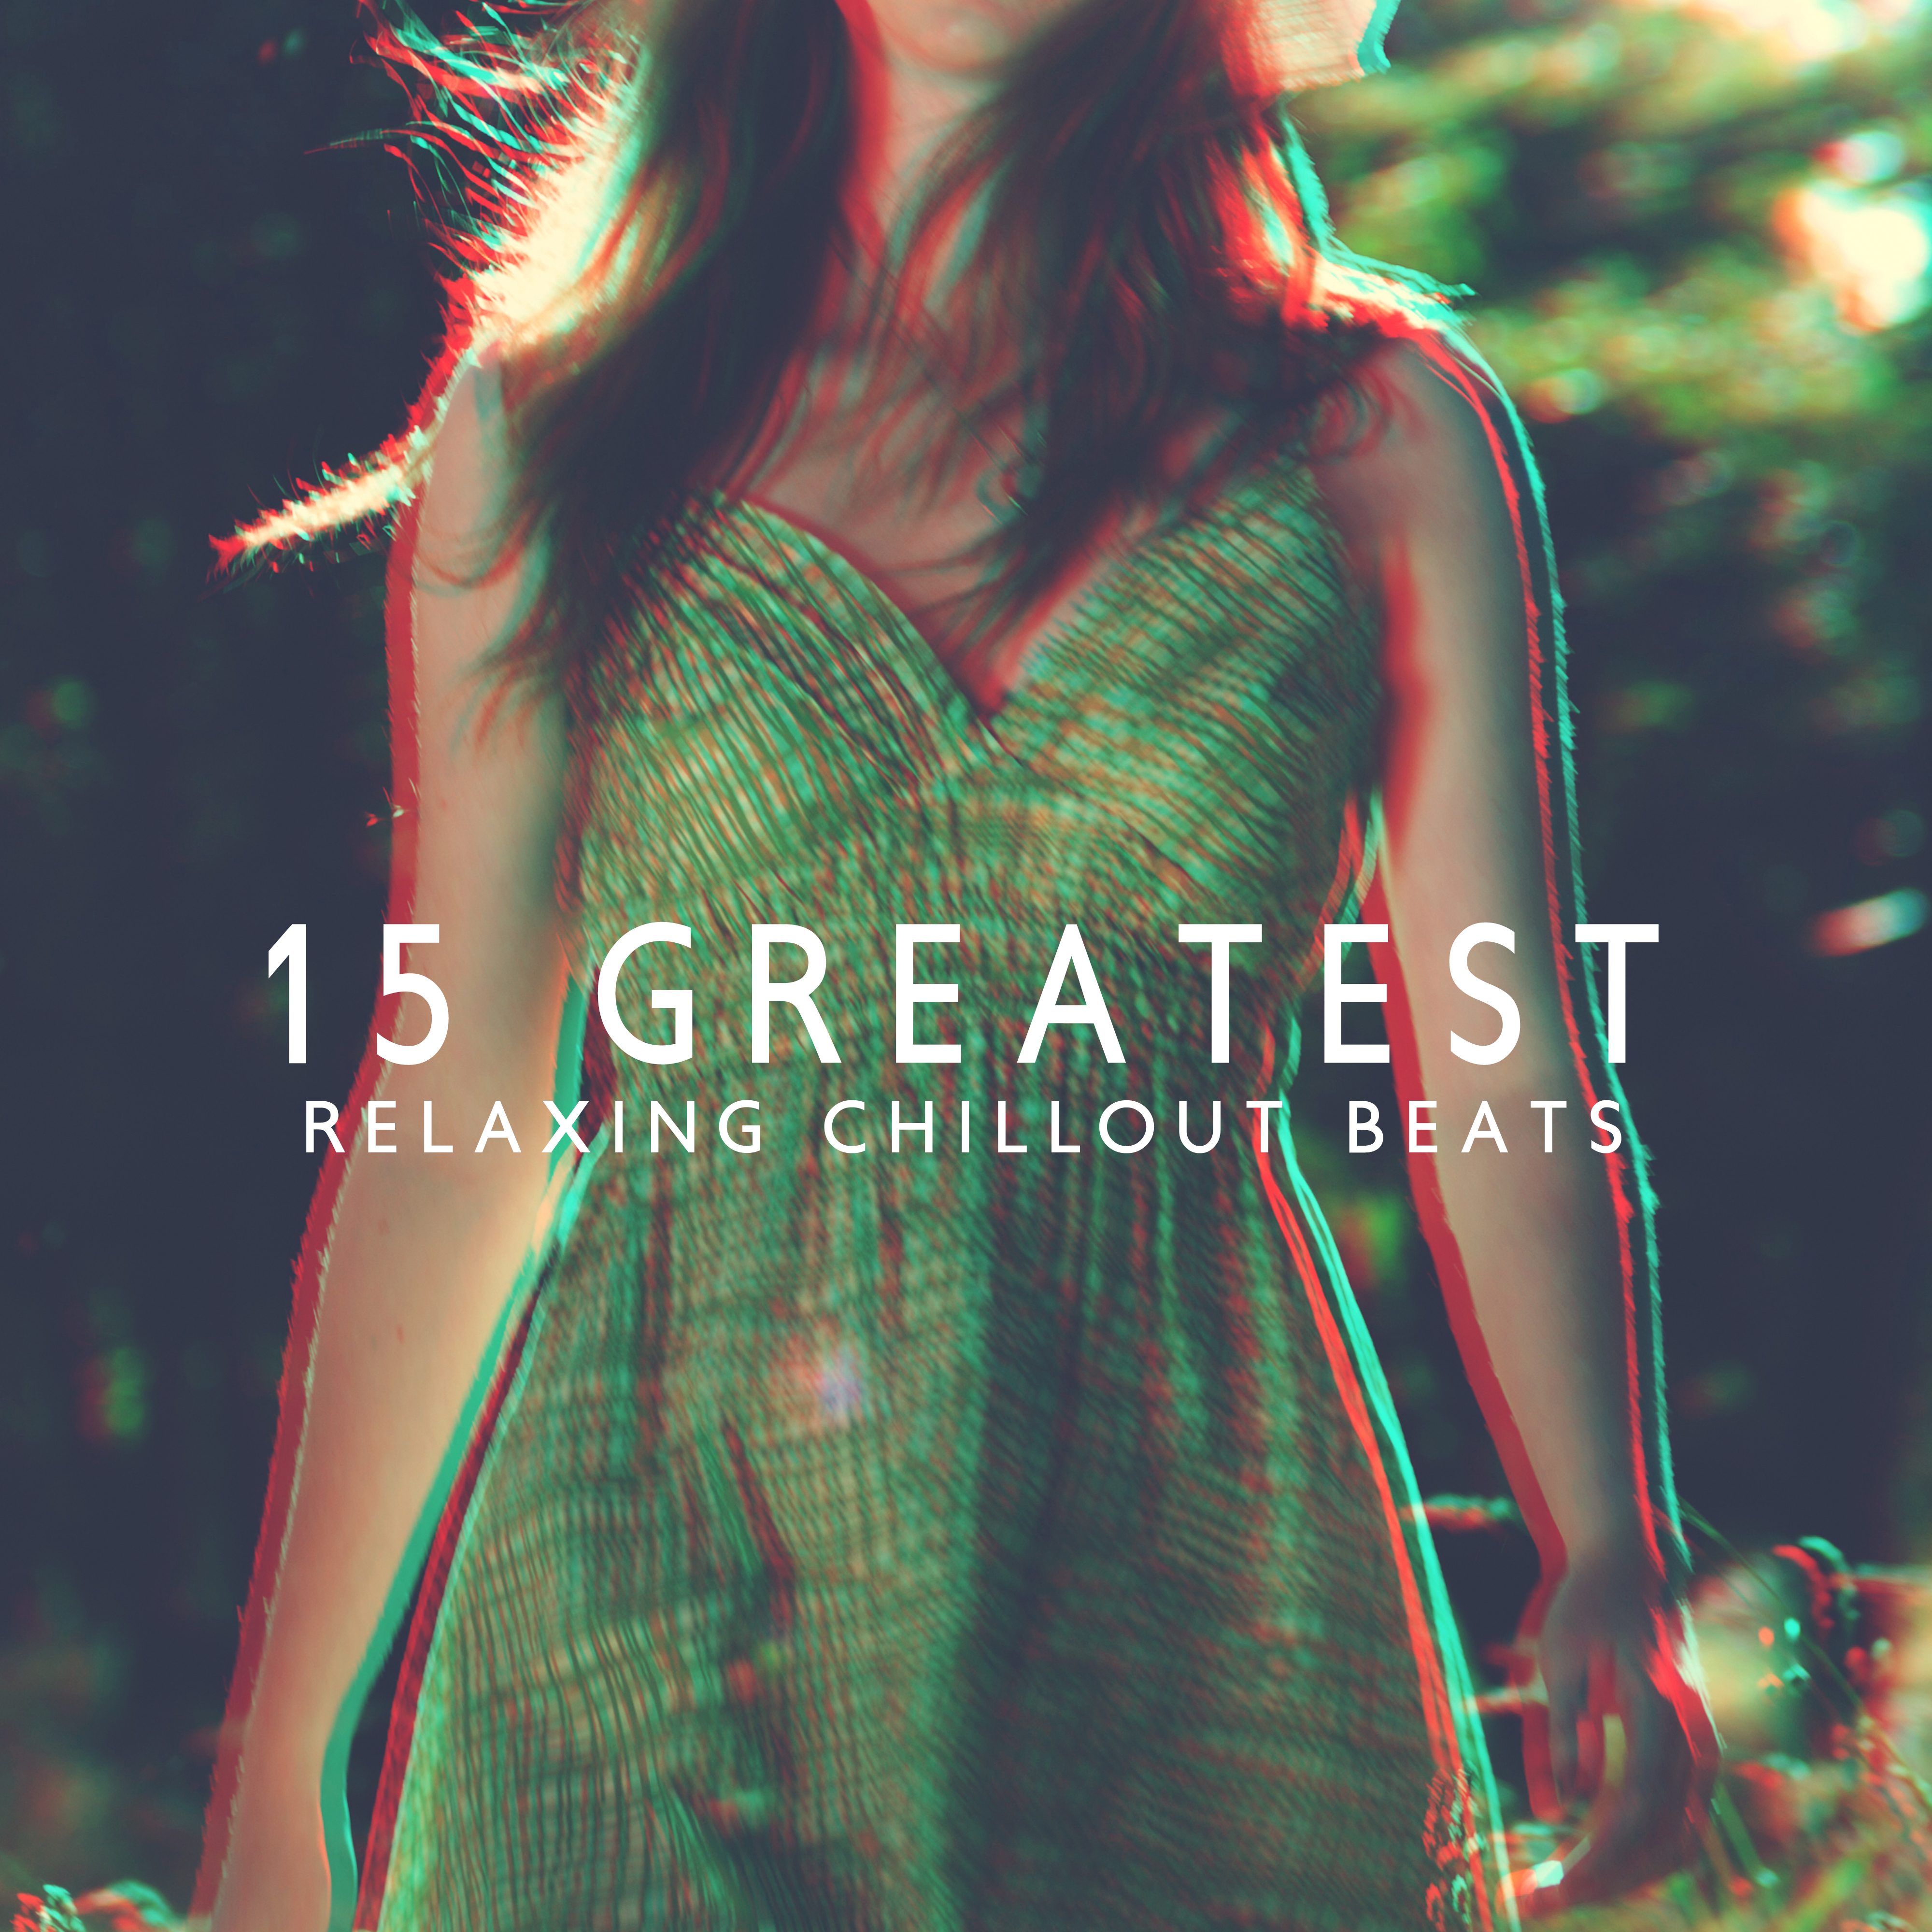 15 Greatest Relaxing Chillout Beats